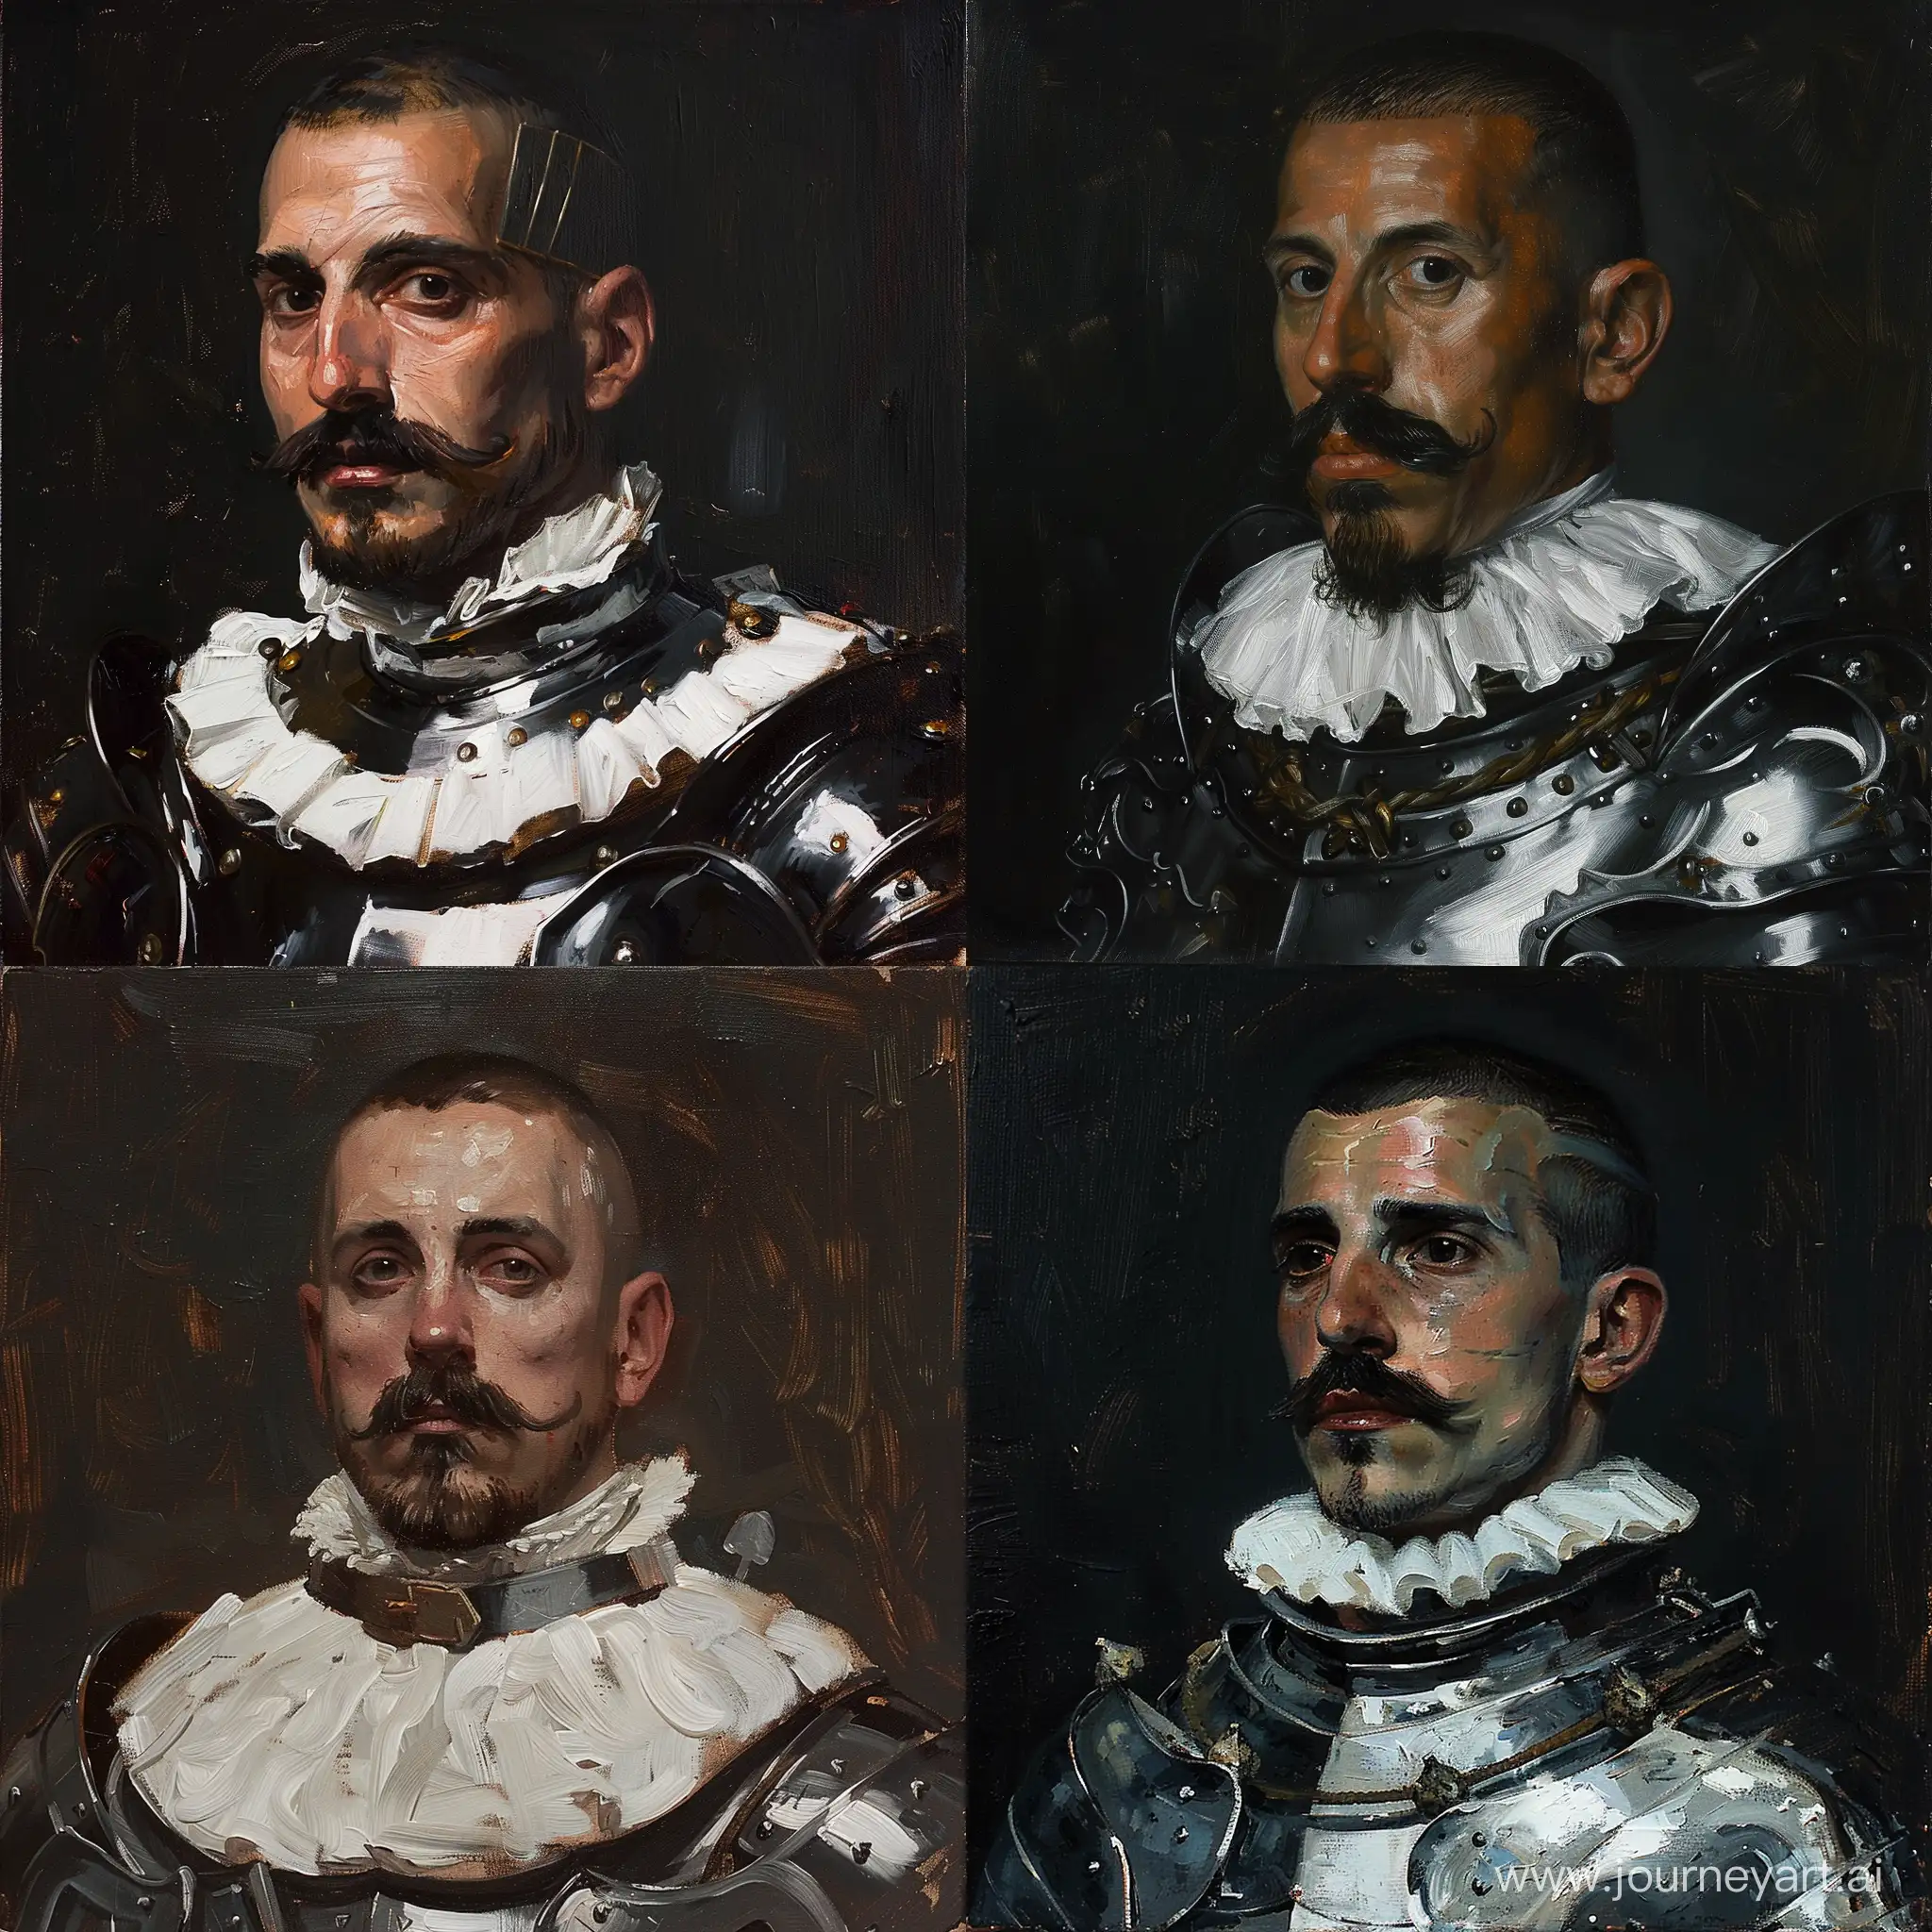 Oil painting Spanish knight Pedro Fernandez de Castro. Wearing plate knight armor and white ruff neck. He has buzz cut hairstyle handle bar mustache and a small piece of beard below his lips to the his chin. Oil painting. Dark brush strikes.